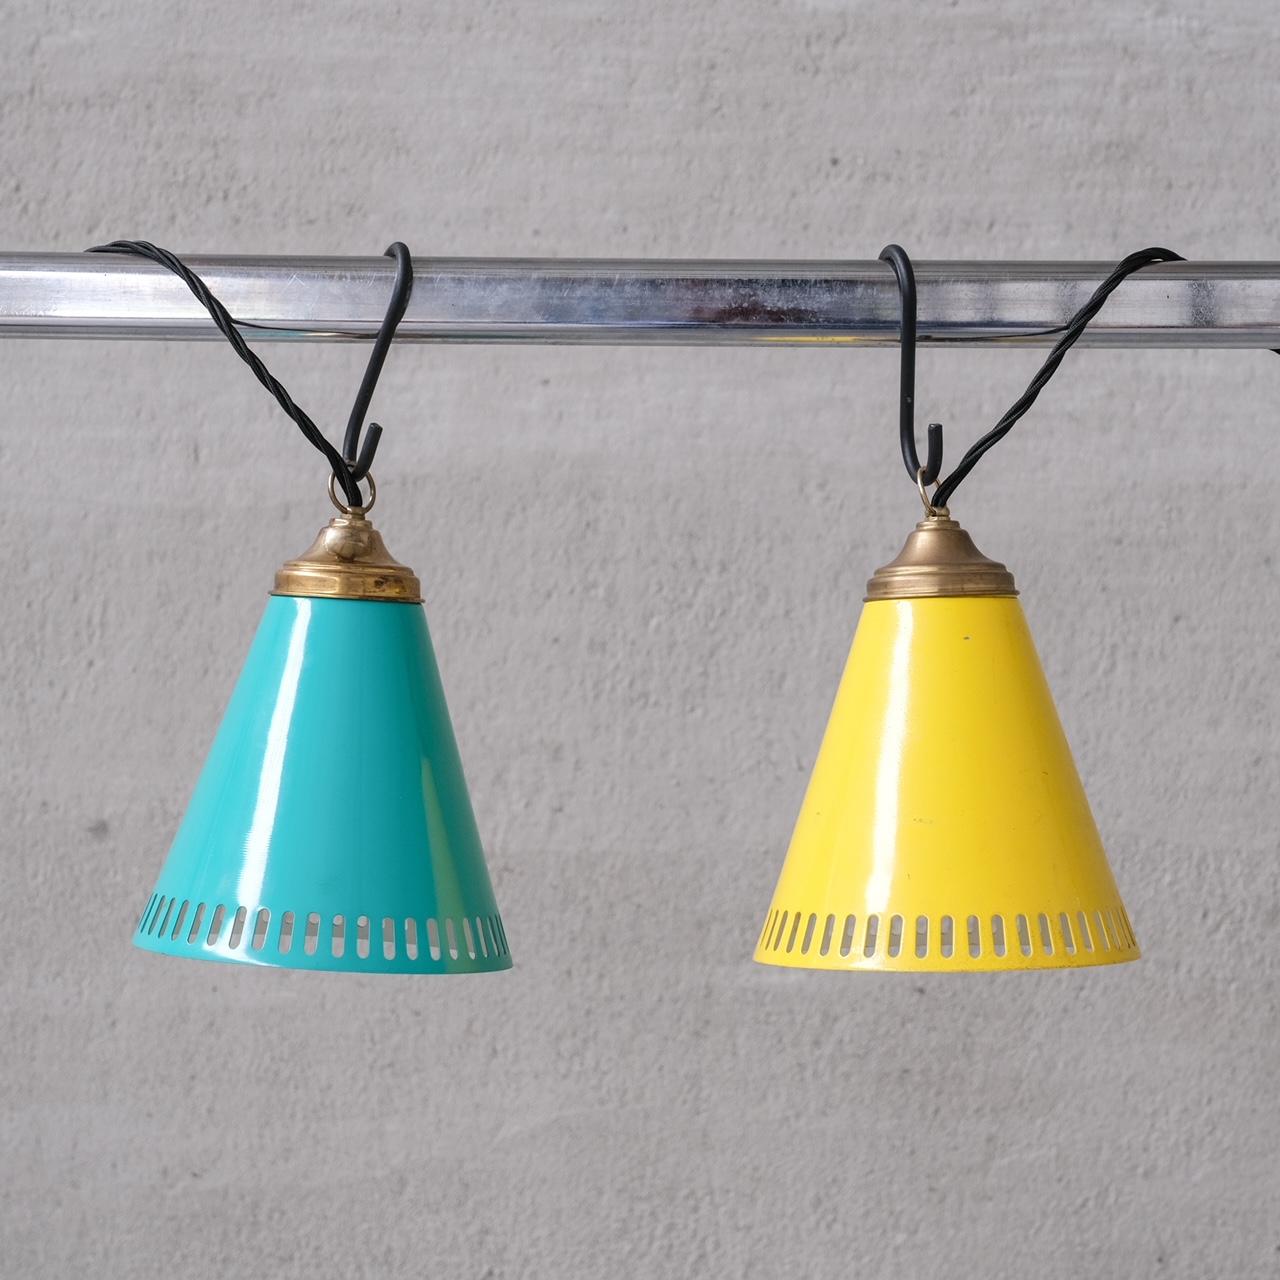 New Old Stock Mid-Century Metal Pendant Shade Lights (6 available) For Sale 2